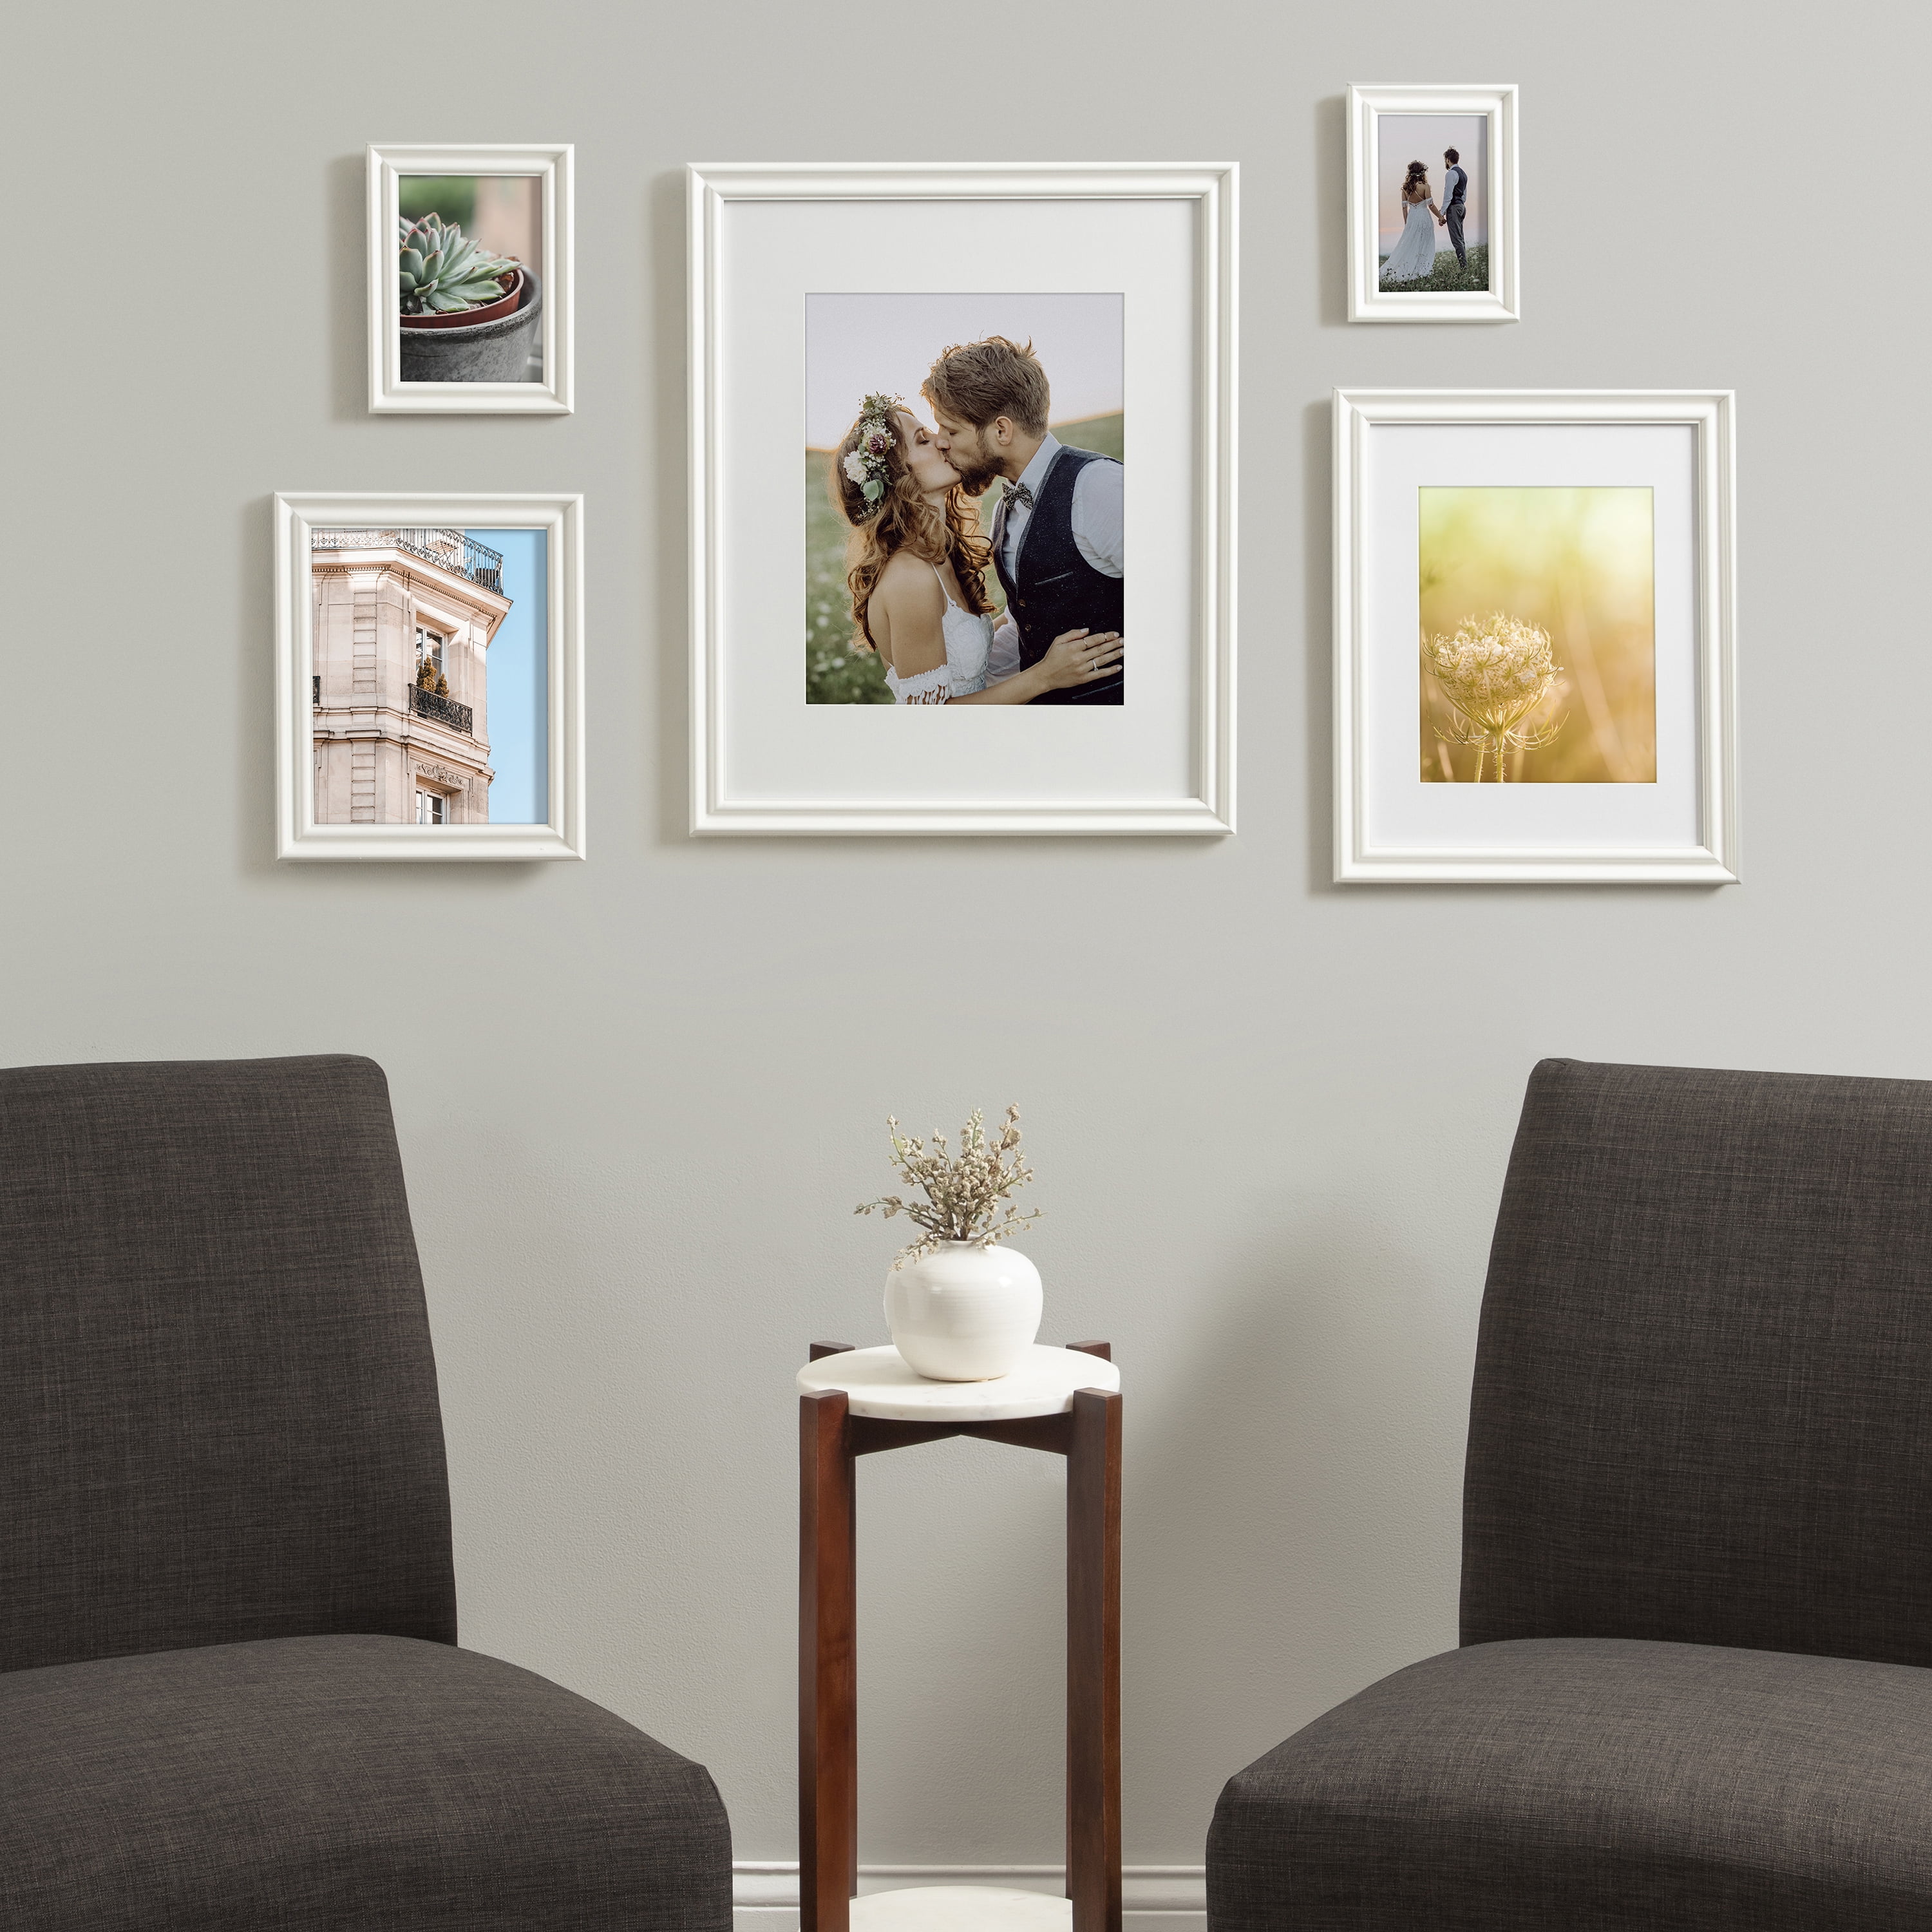 16x20 Frame Rustic Grey - Matted to 11x14 Picture, Frames by EcoHome